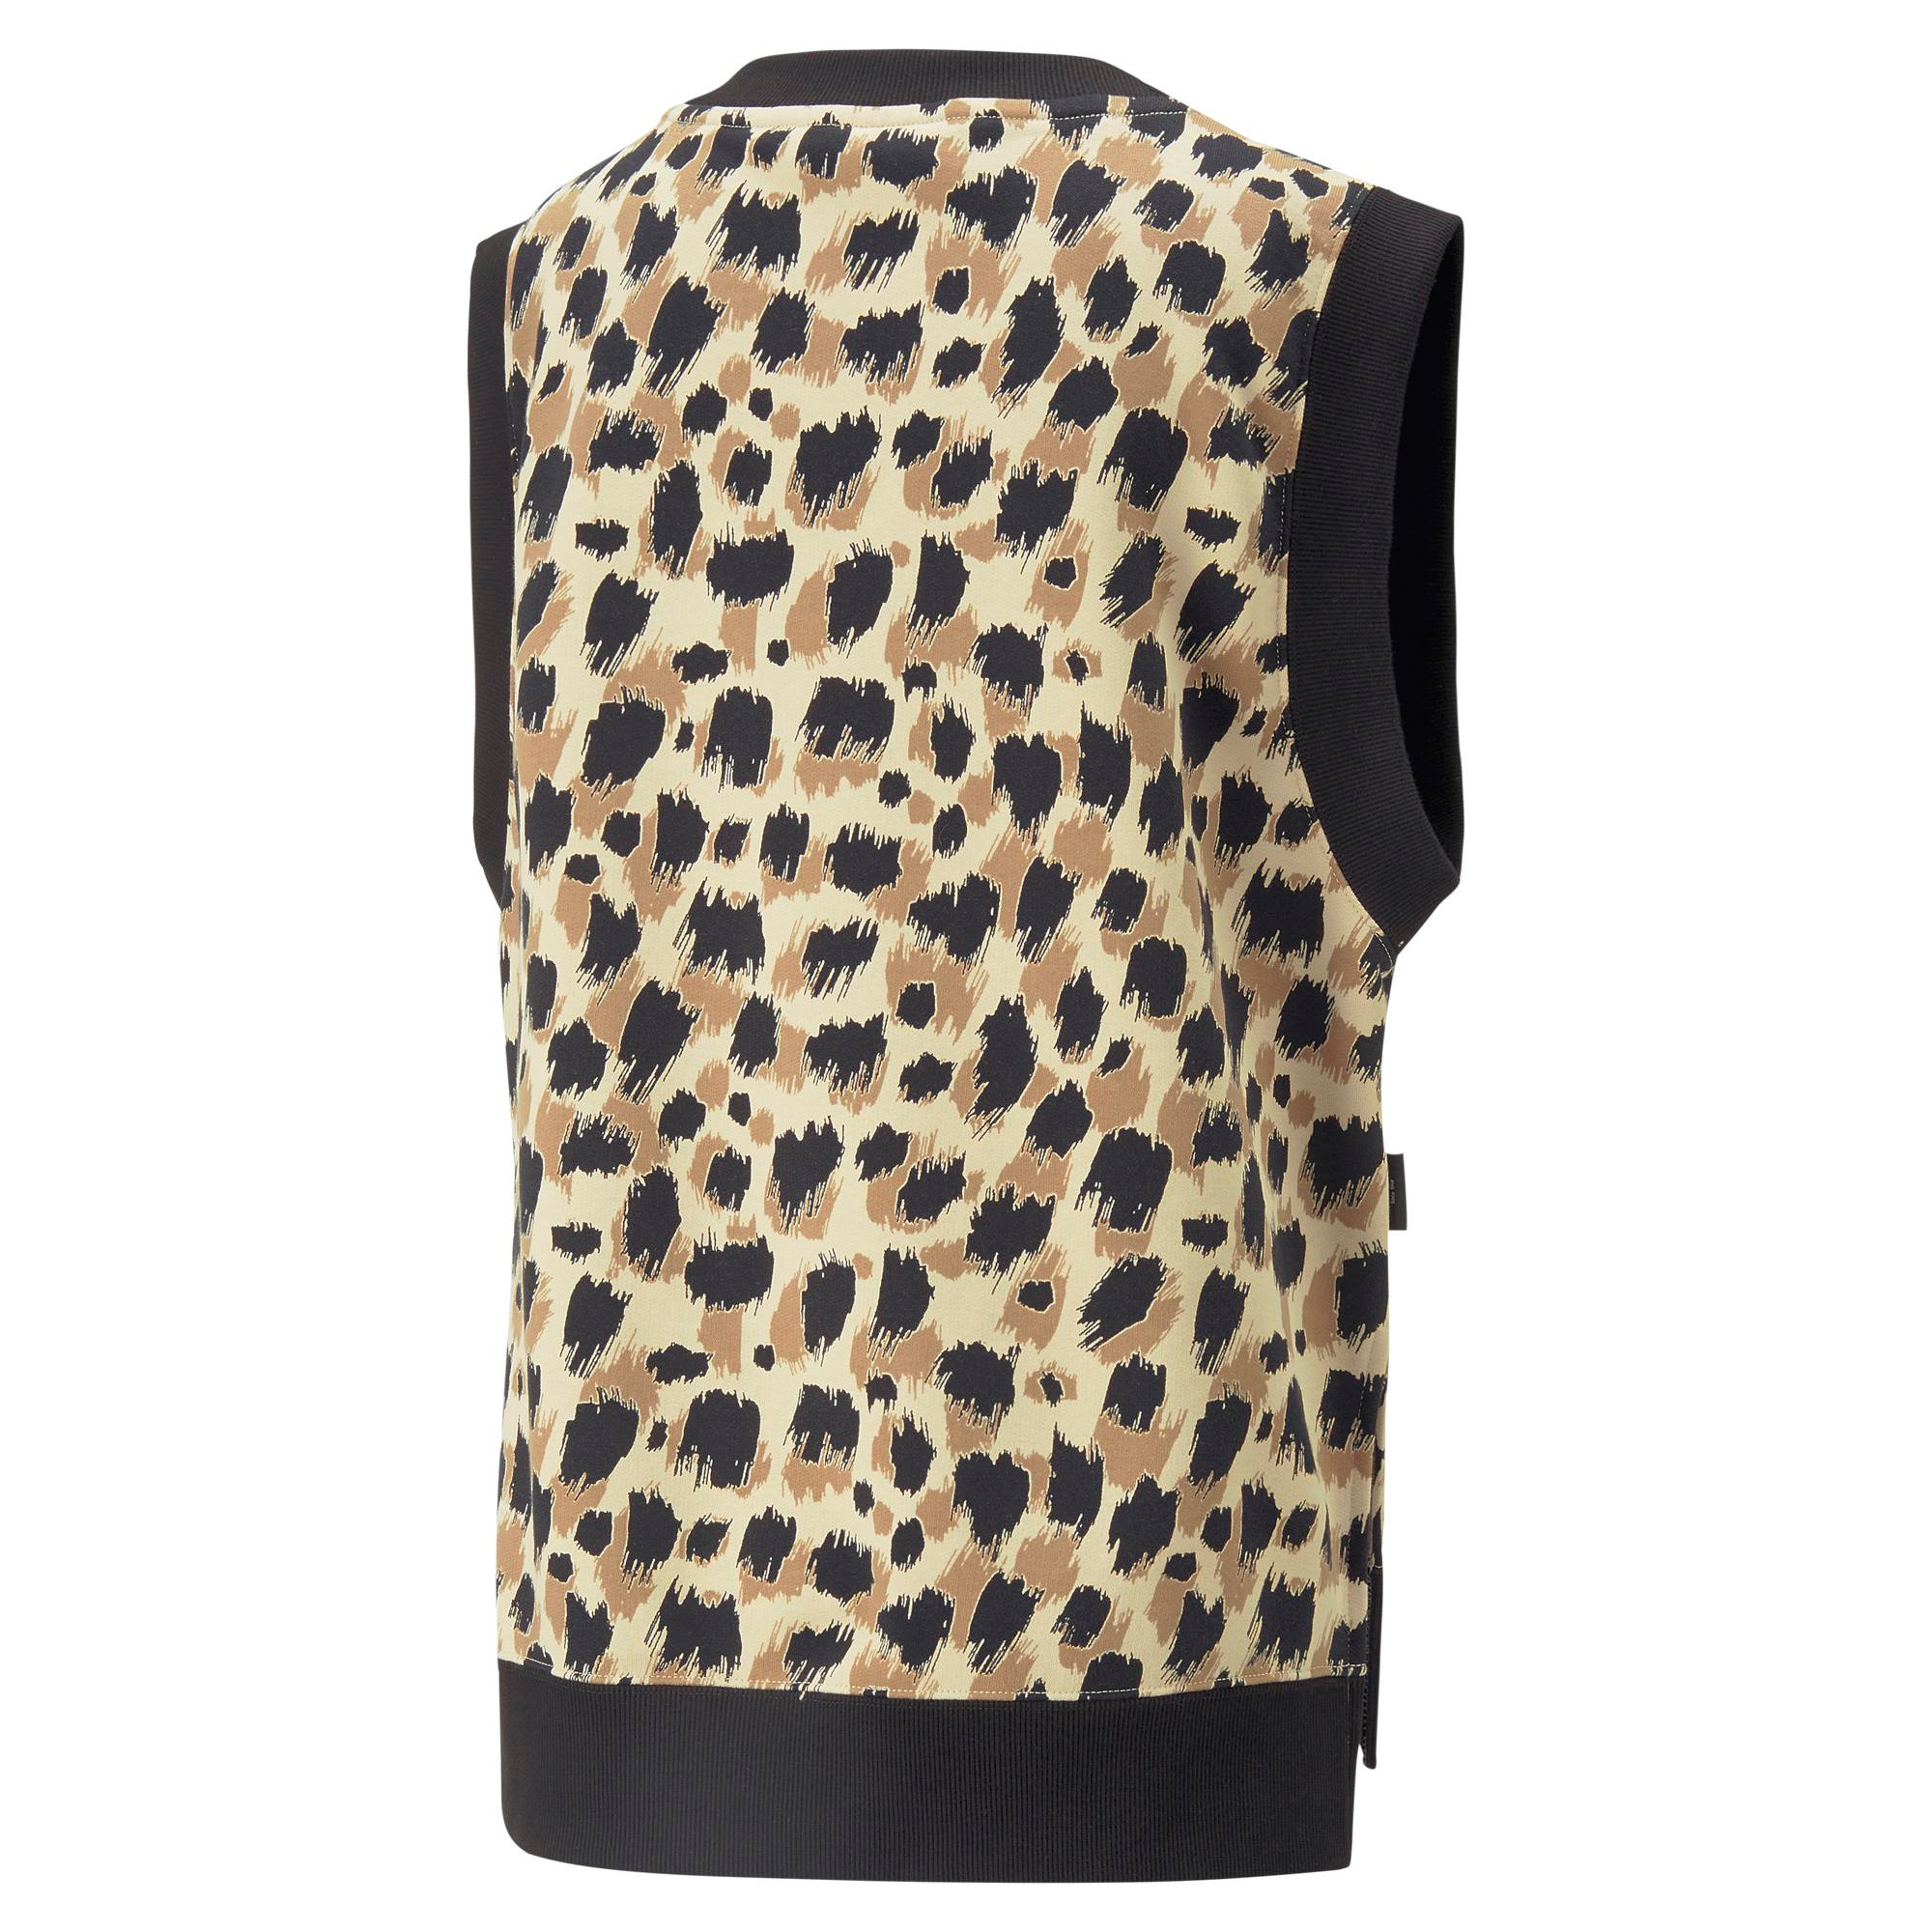 Puma - Gilet in cotone con stampa animalier, Animalier, large image number 1